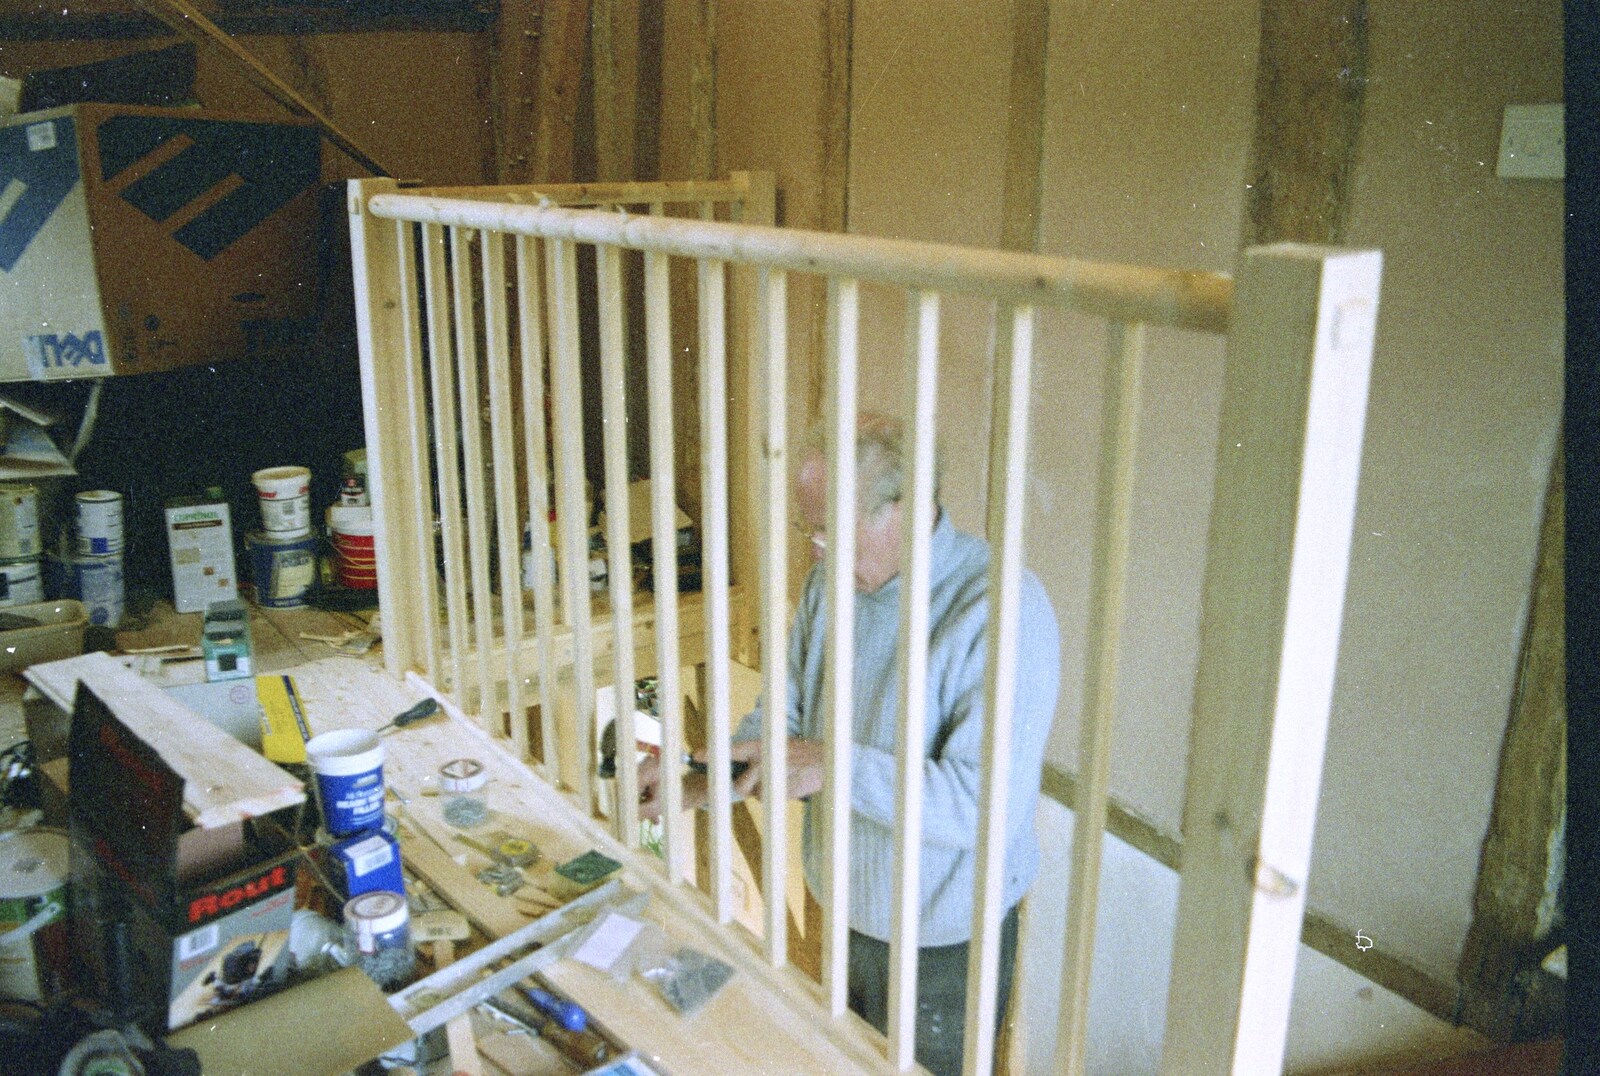 The Old Man works on the bannisters from 3G Lab, and Building a Staircase, Brome, Suffolk - 11th February 2001